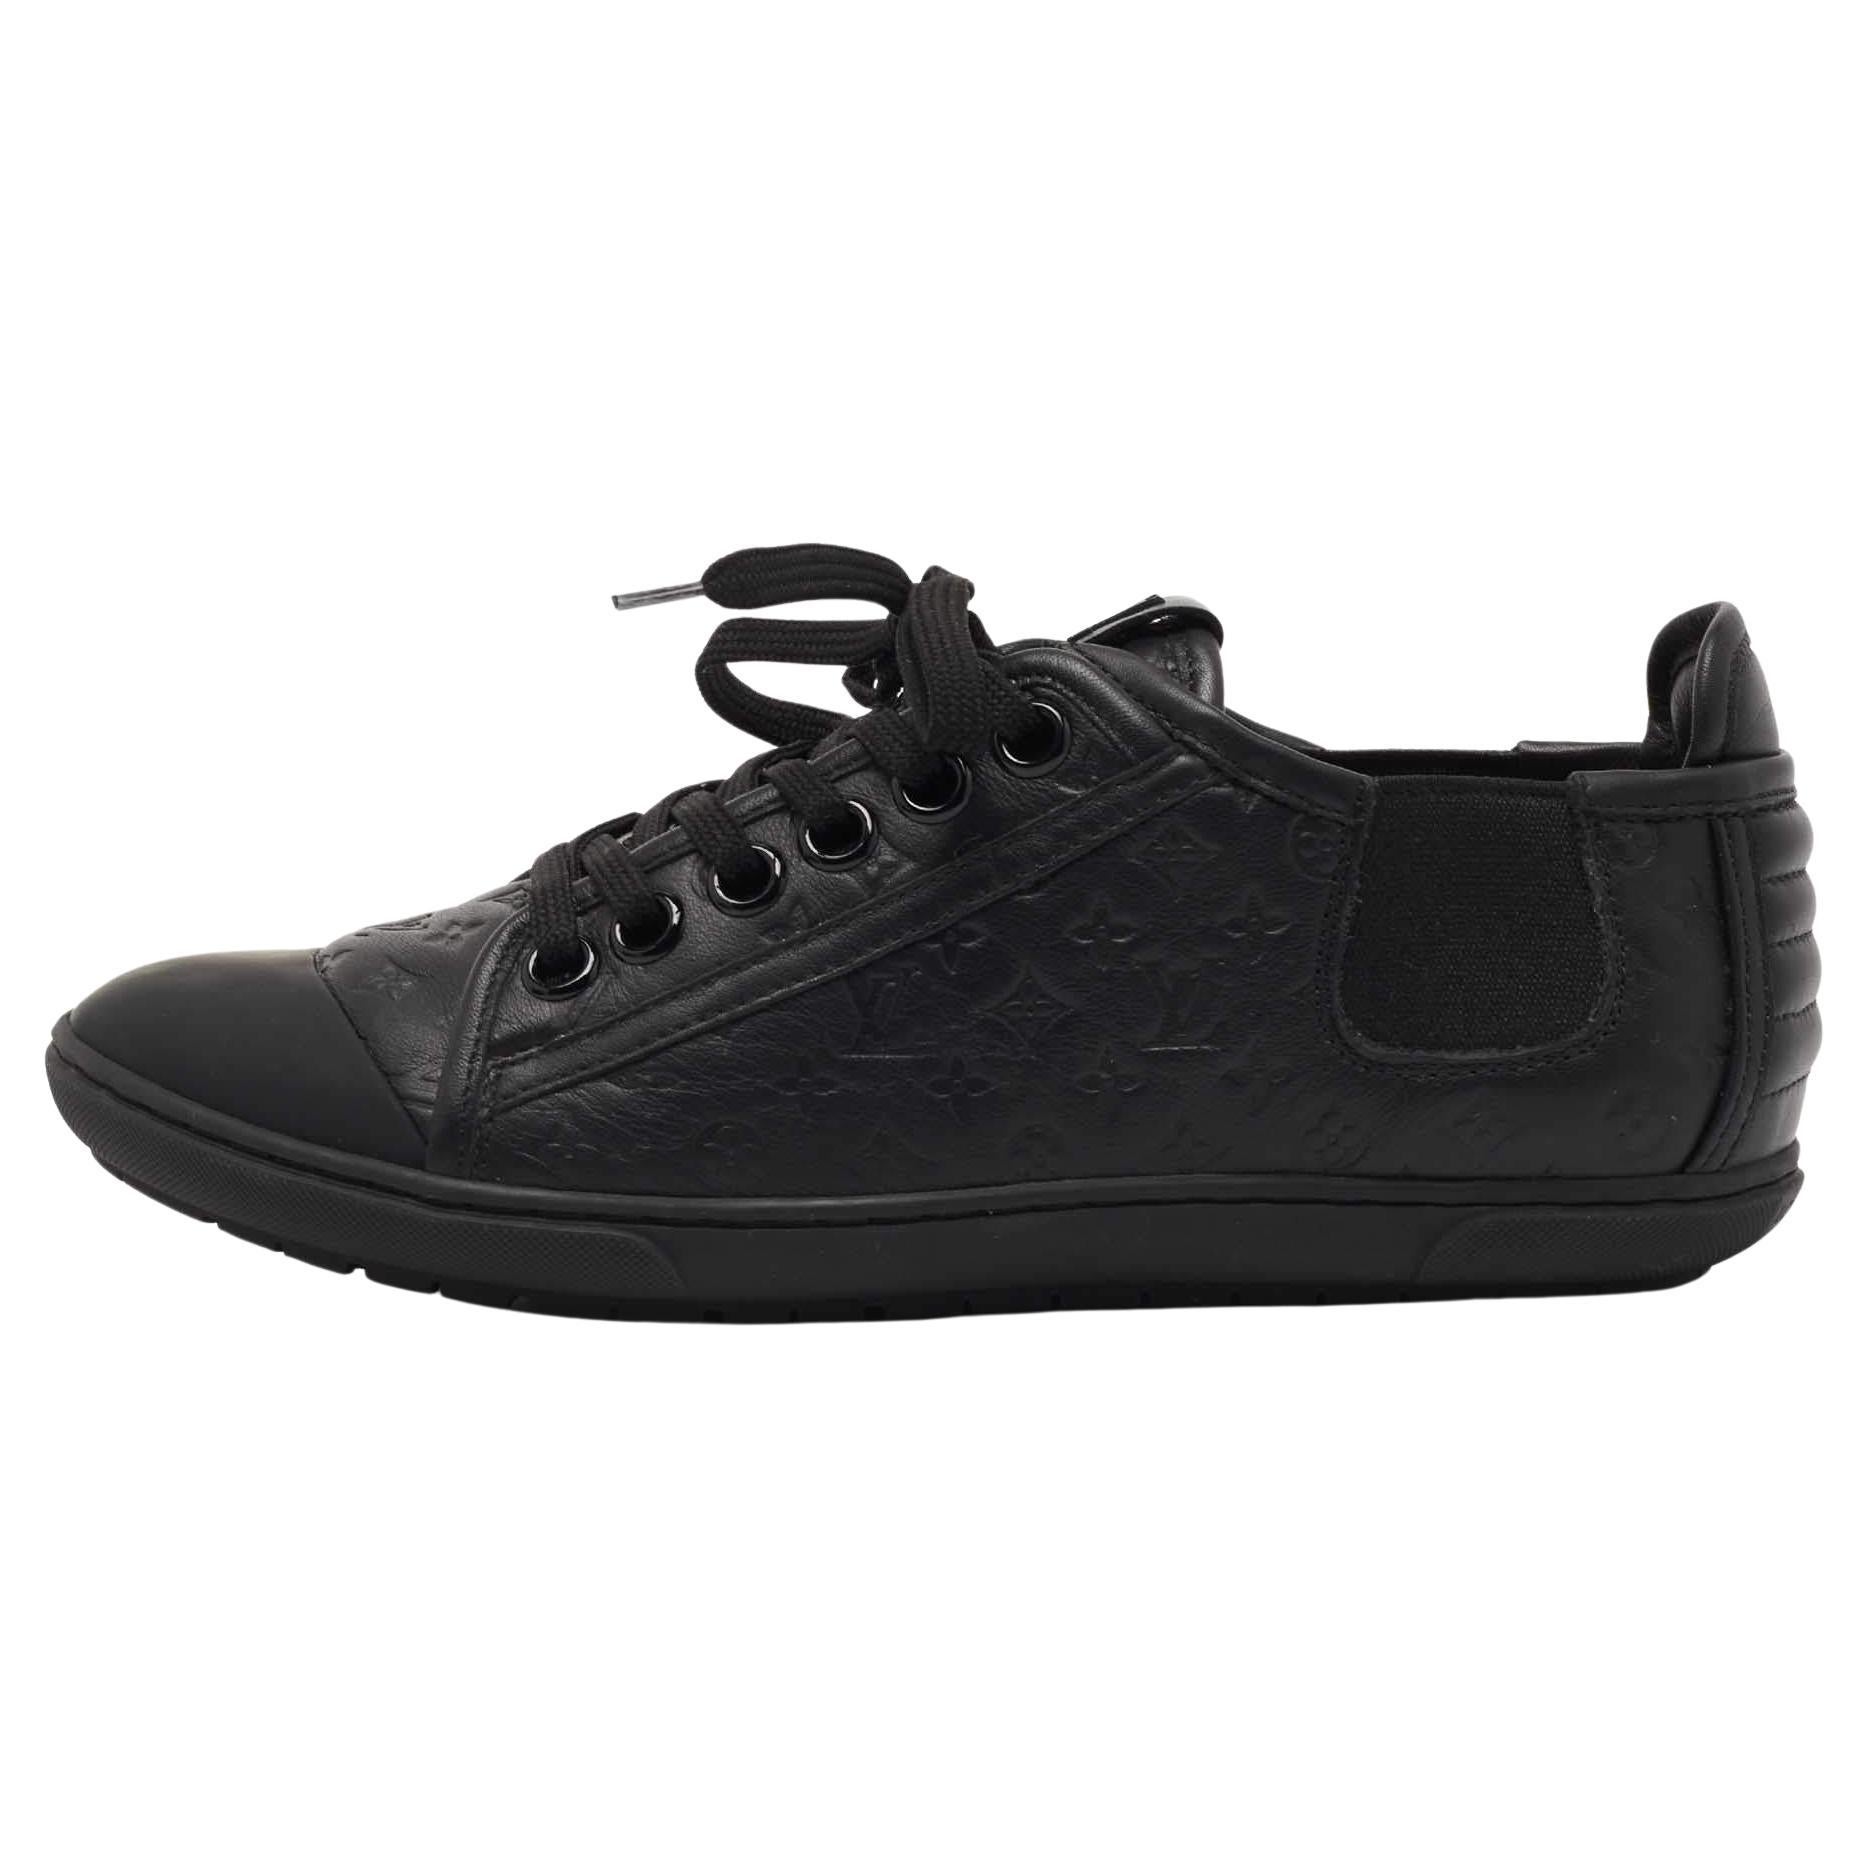 Louis Vuitton Men's Mexico zip Shoes in Waxed Perforated Leather